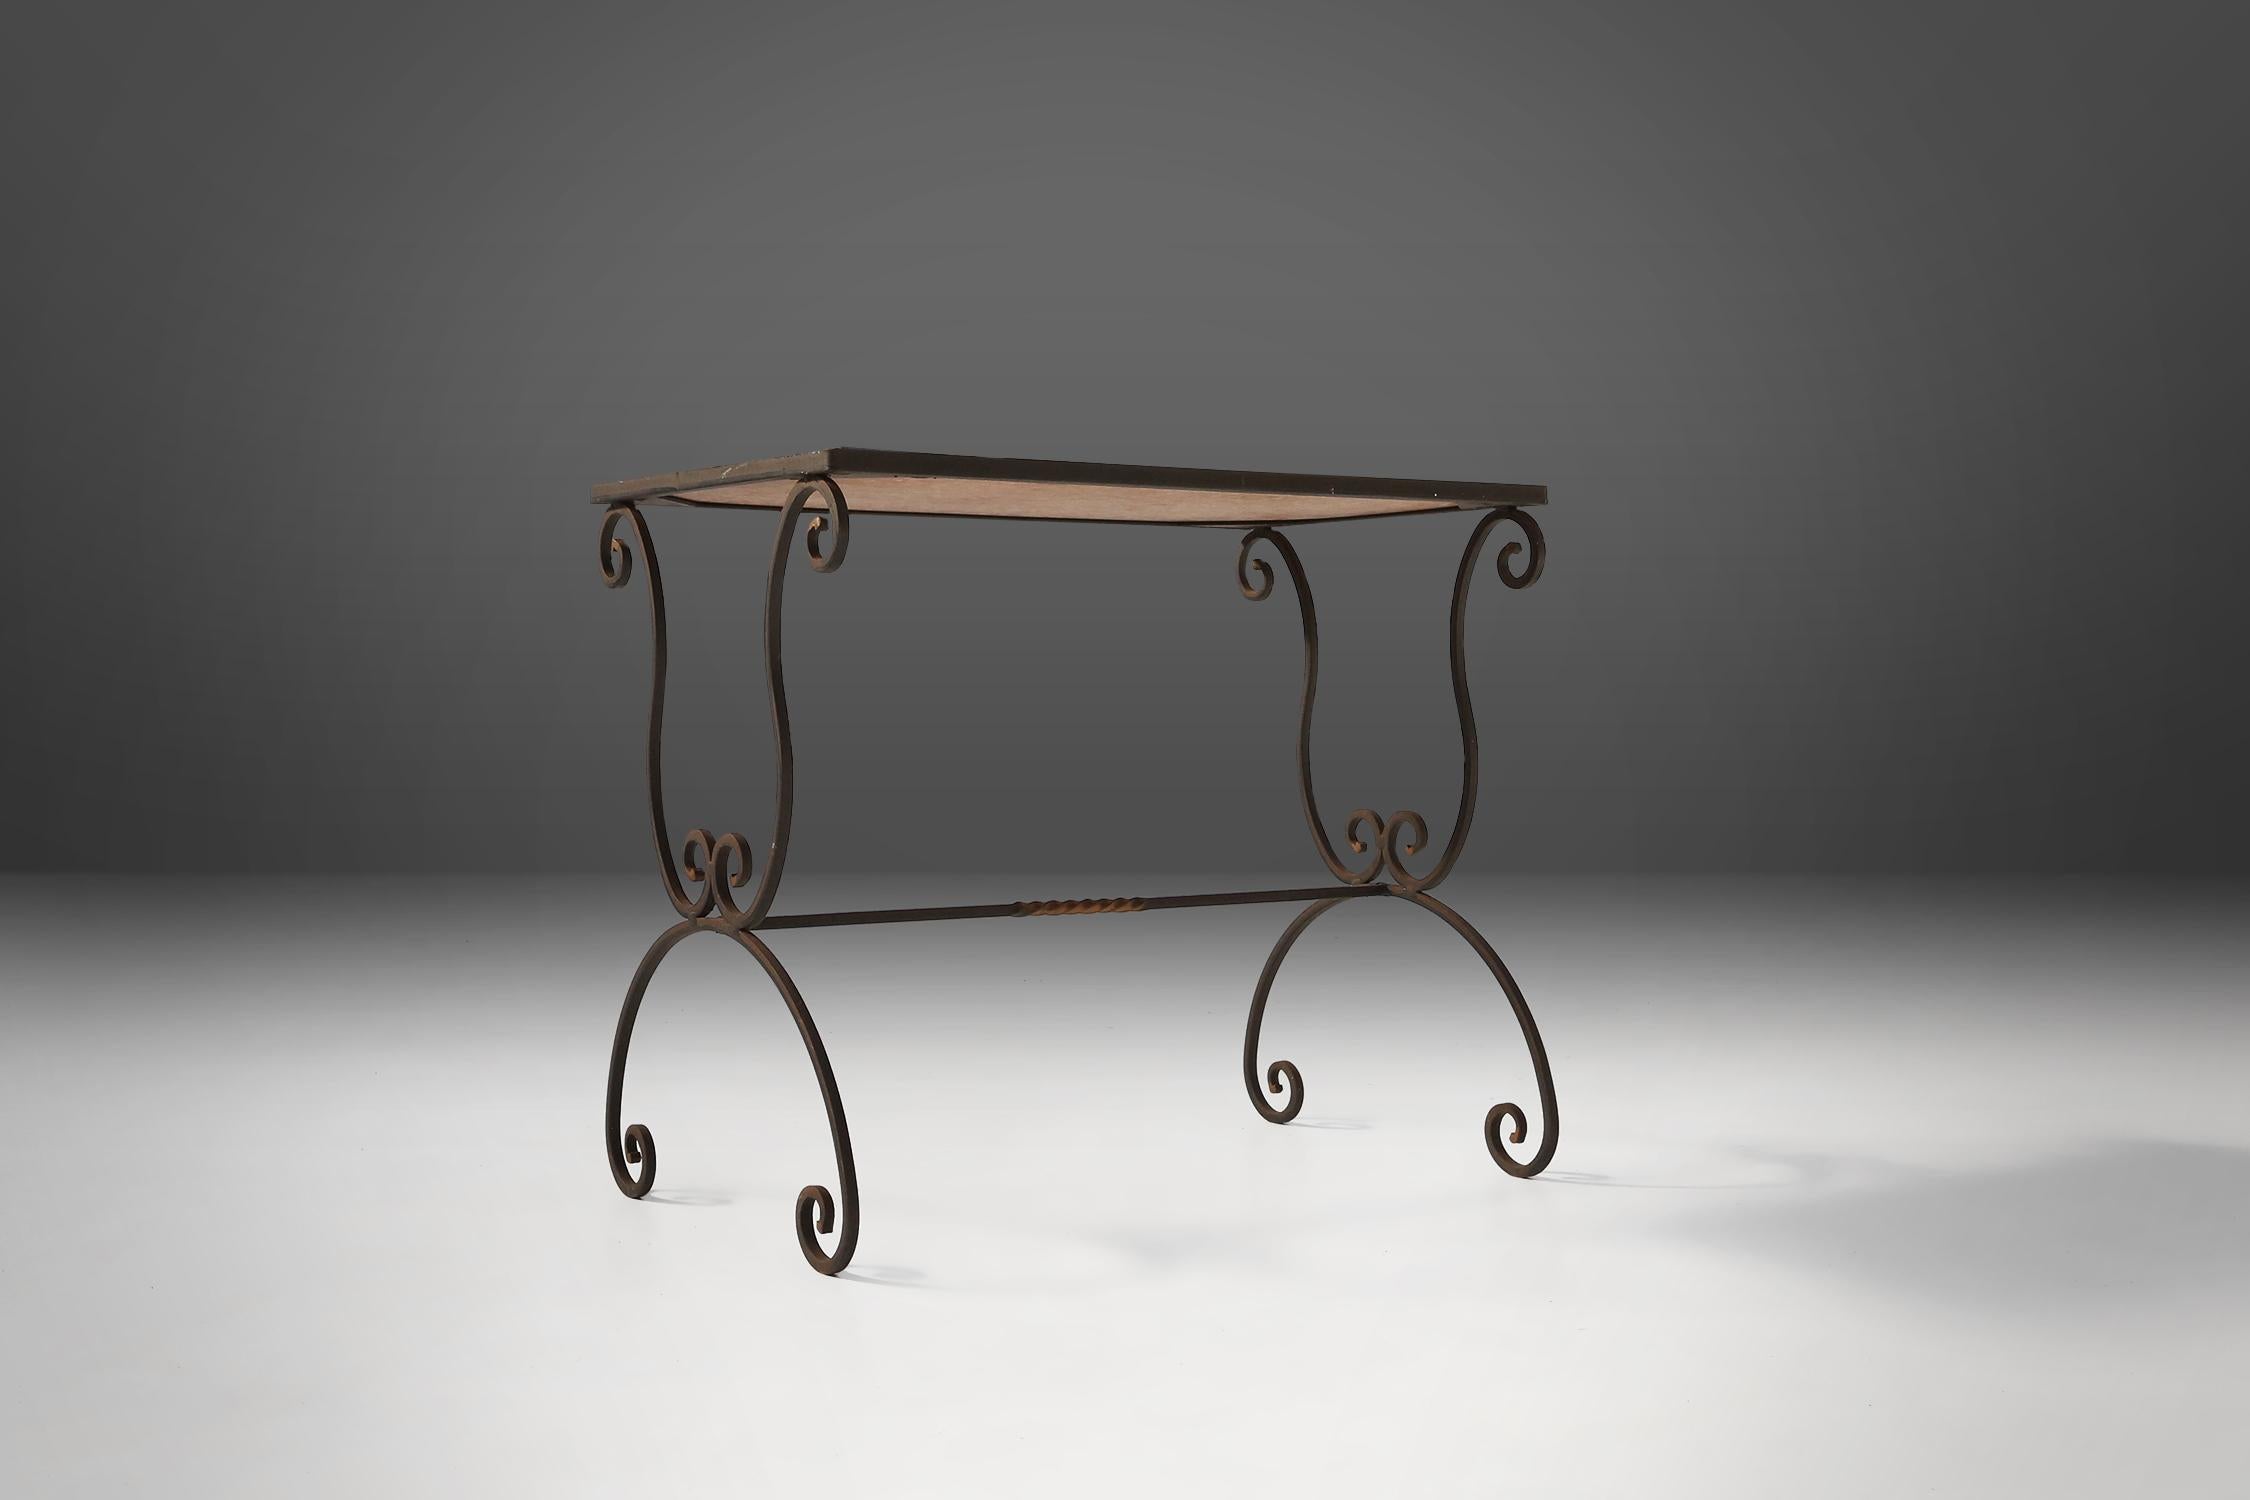 Painted Elegant Italian side table with wrought iron base and decorated ceramic tales, 1 For Sale